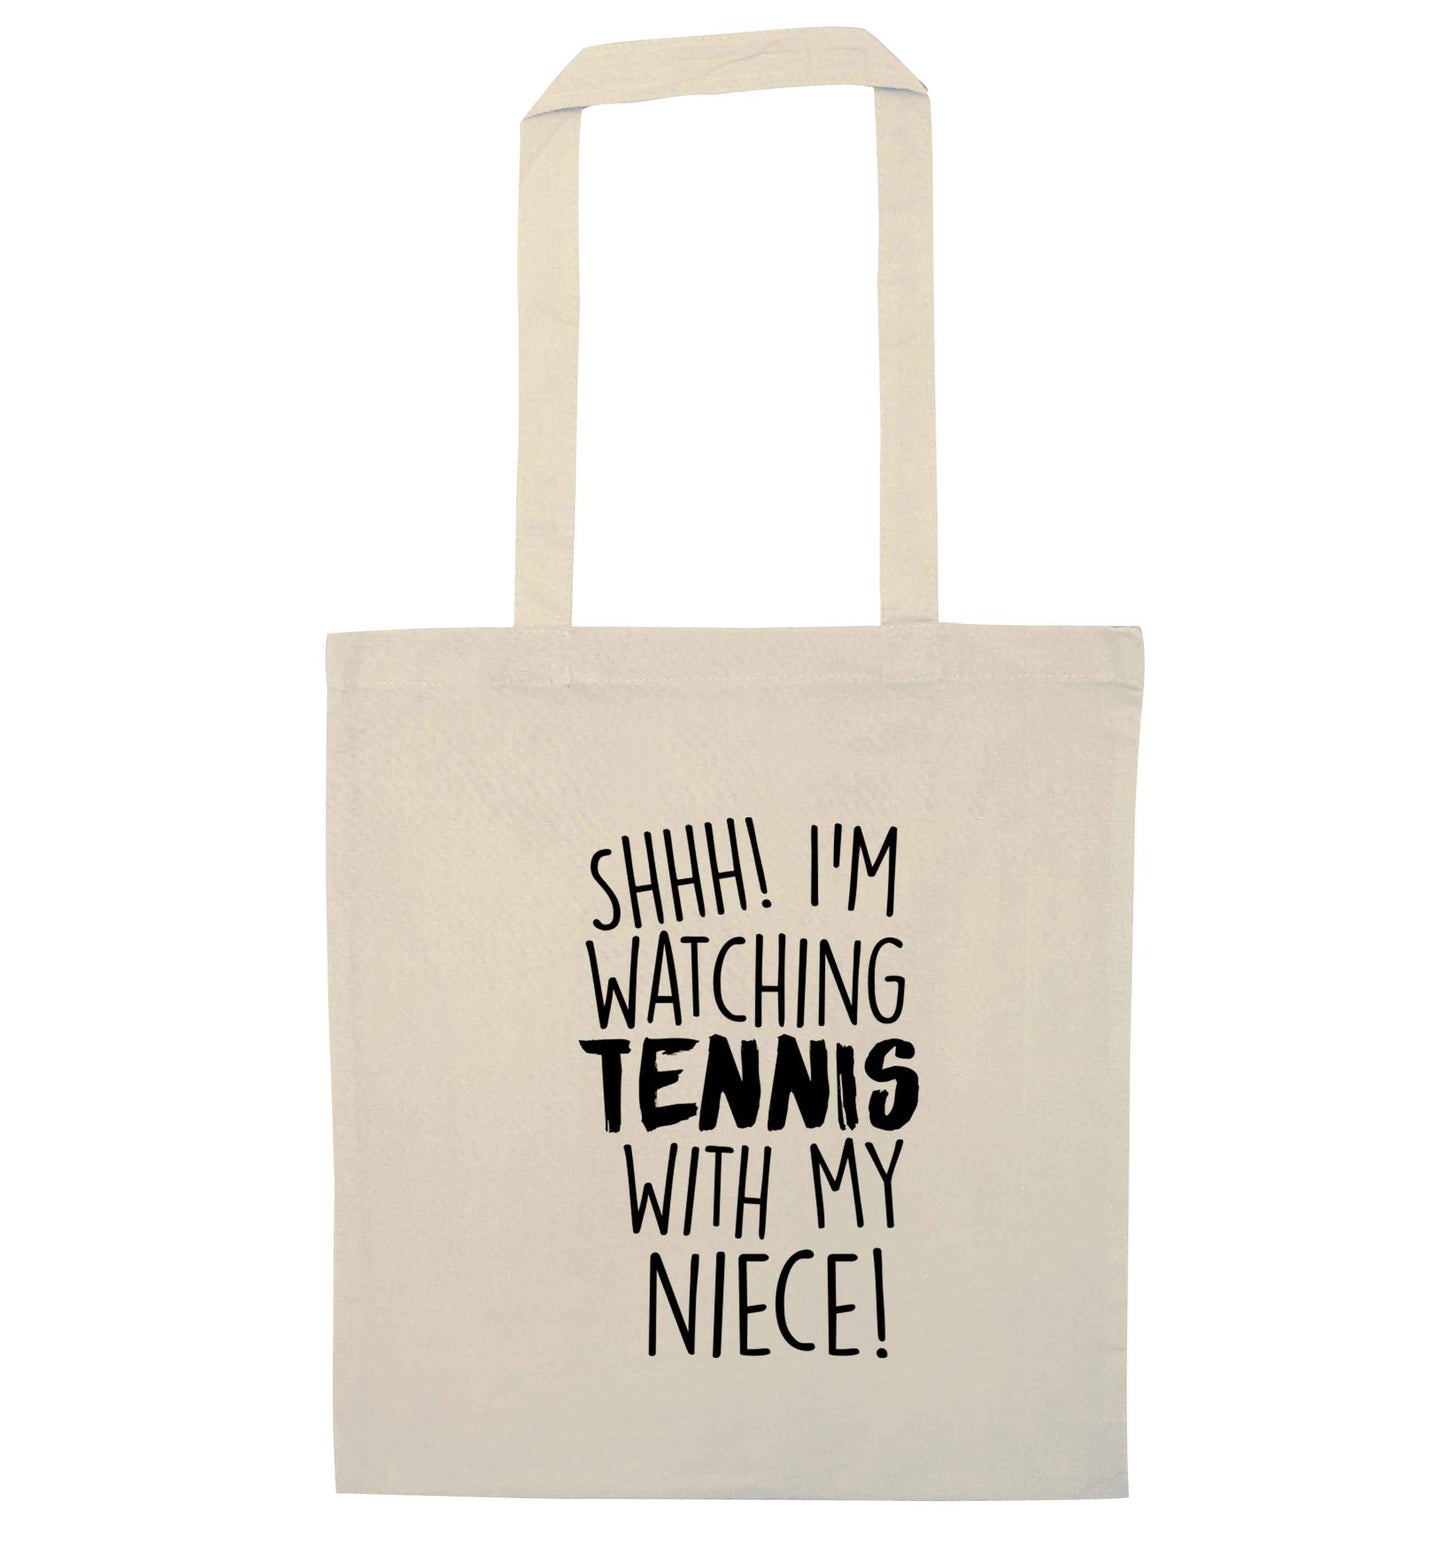 Shh! I'm watching tennis with my niece! natural tote bag